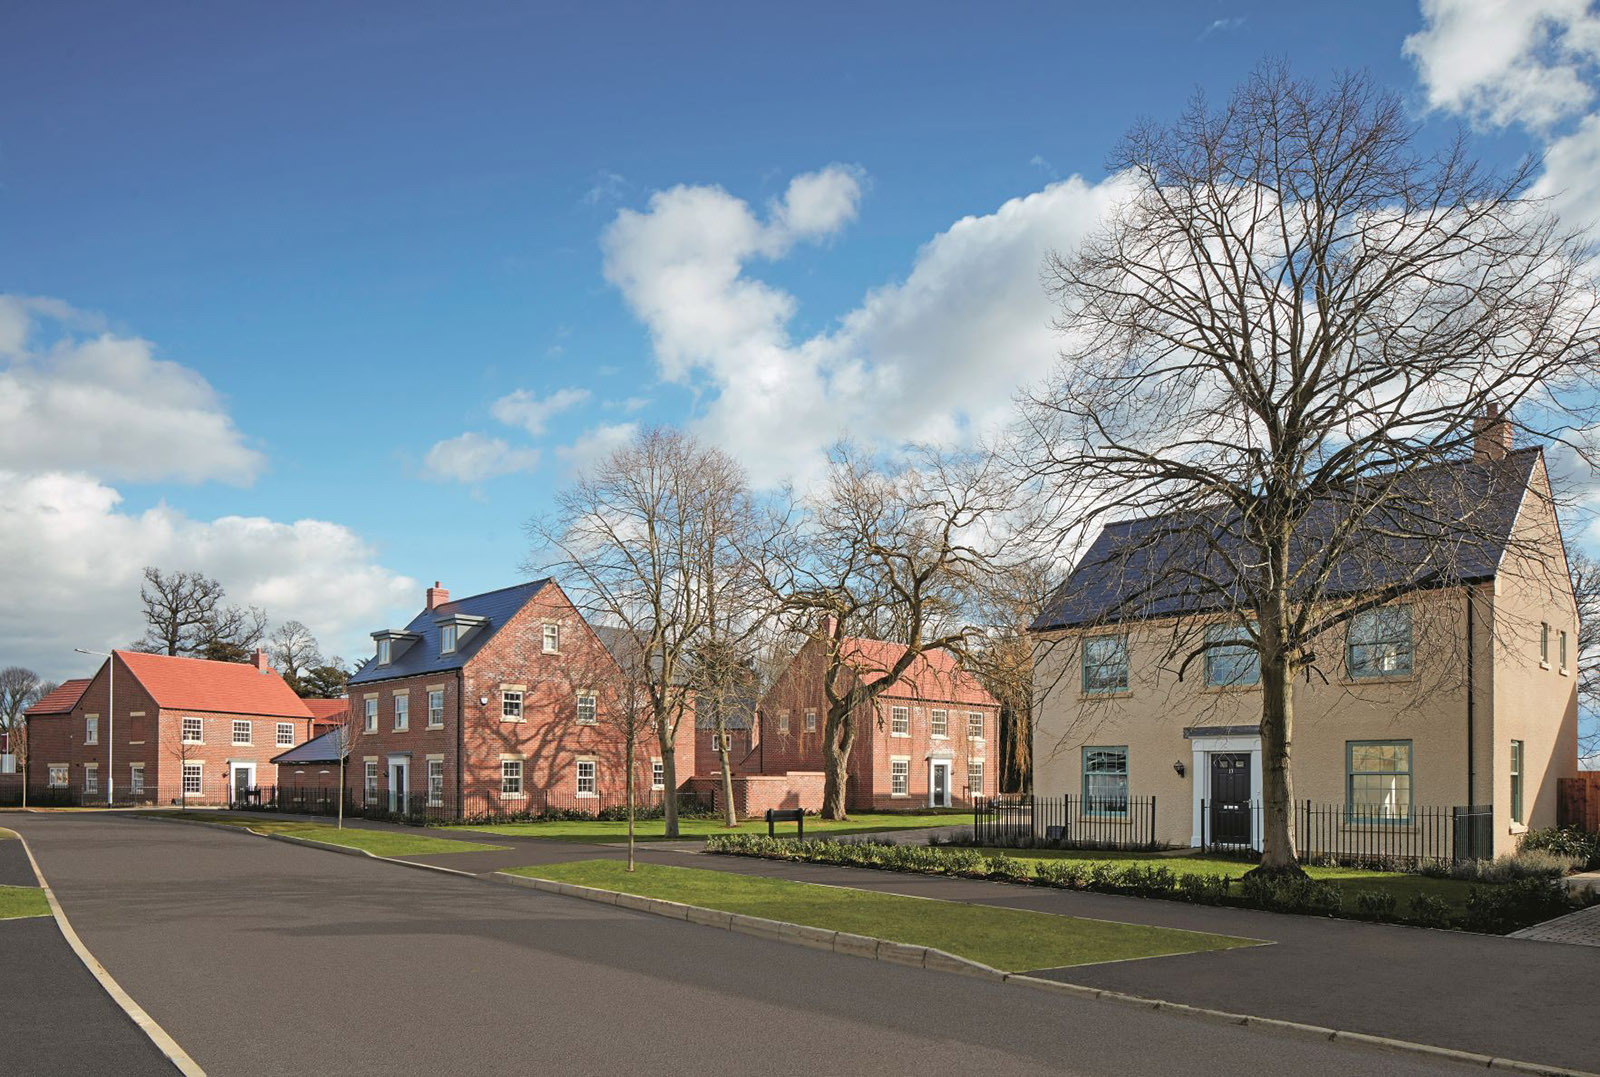 A typical street scene from a Linden Homes development